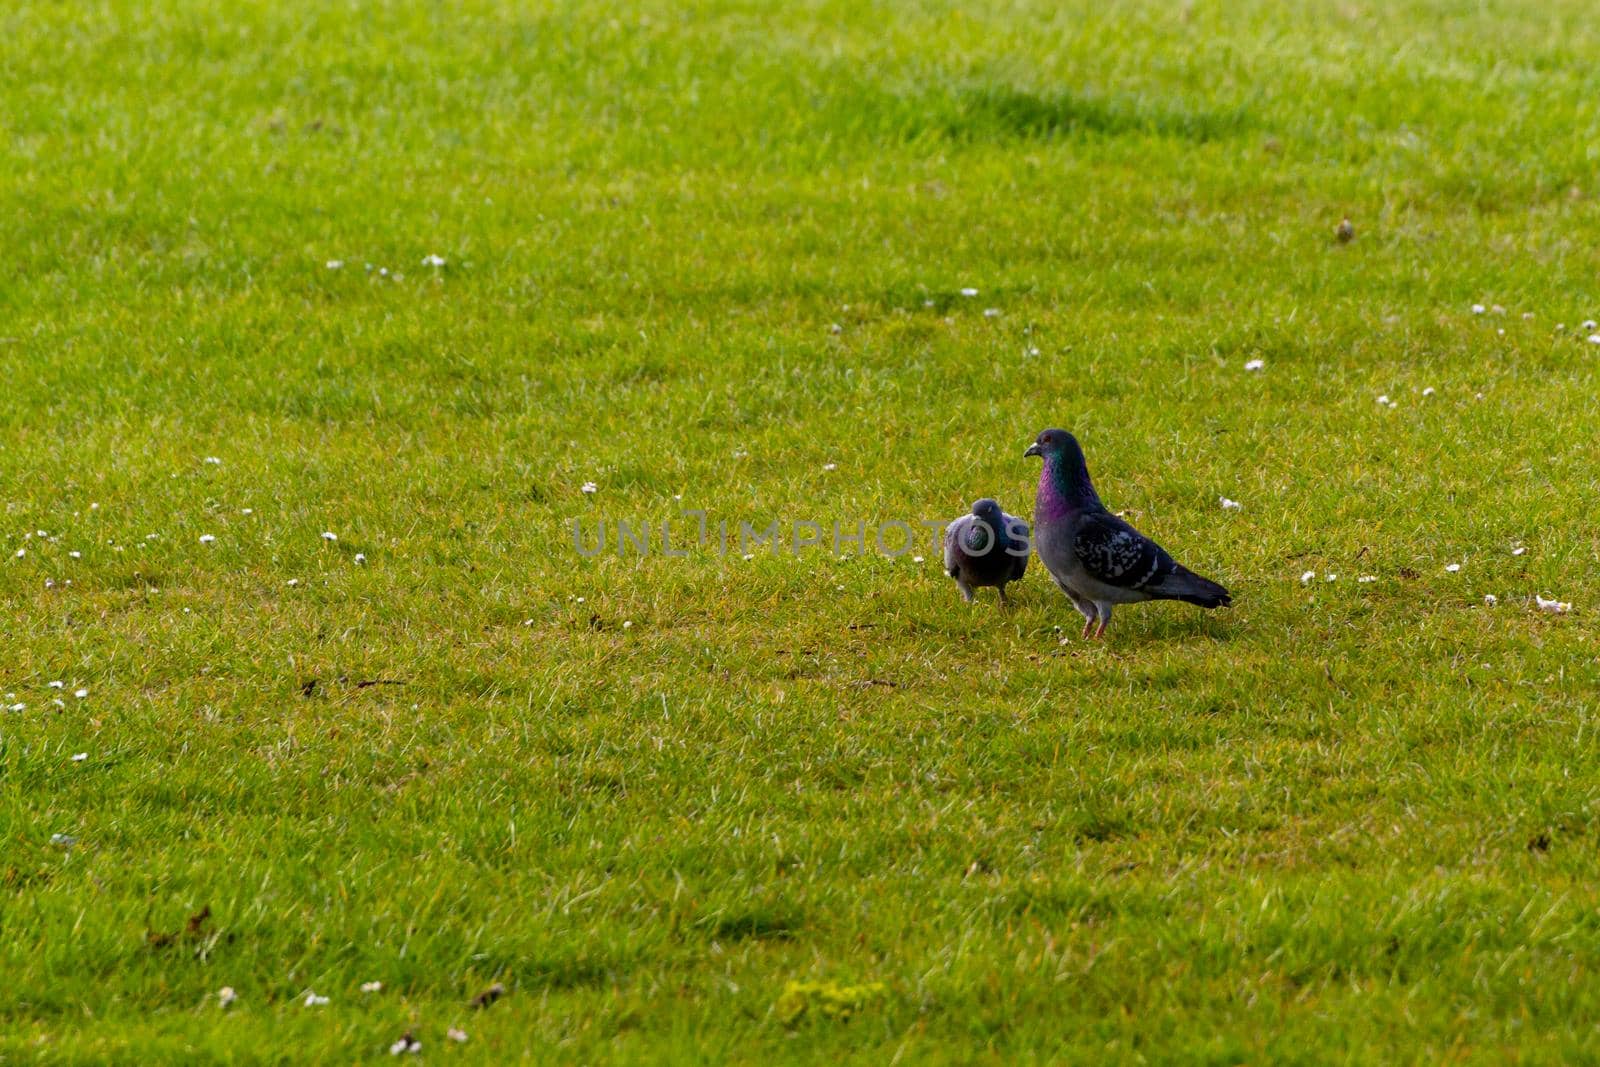 Close-up of two grey pigeons walking on the grass on a sunny day